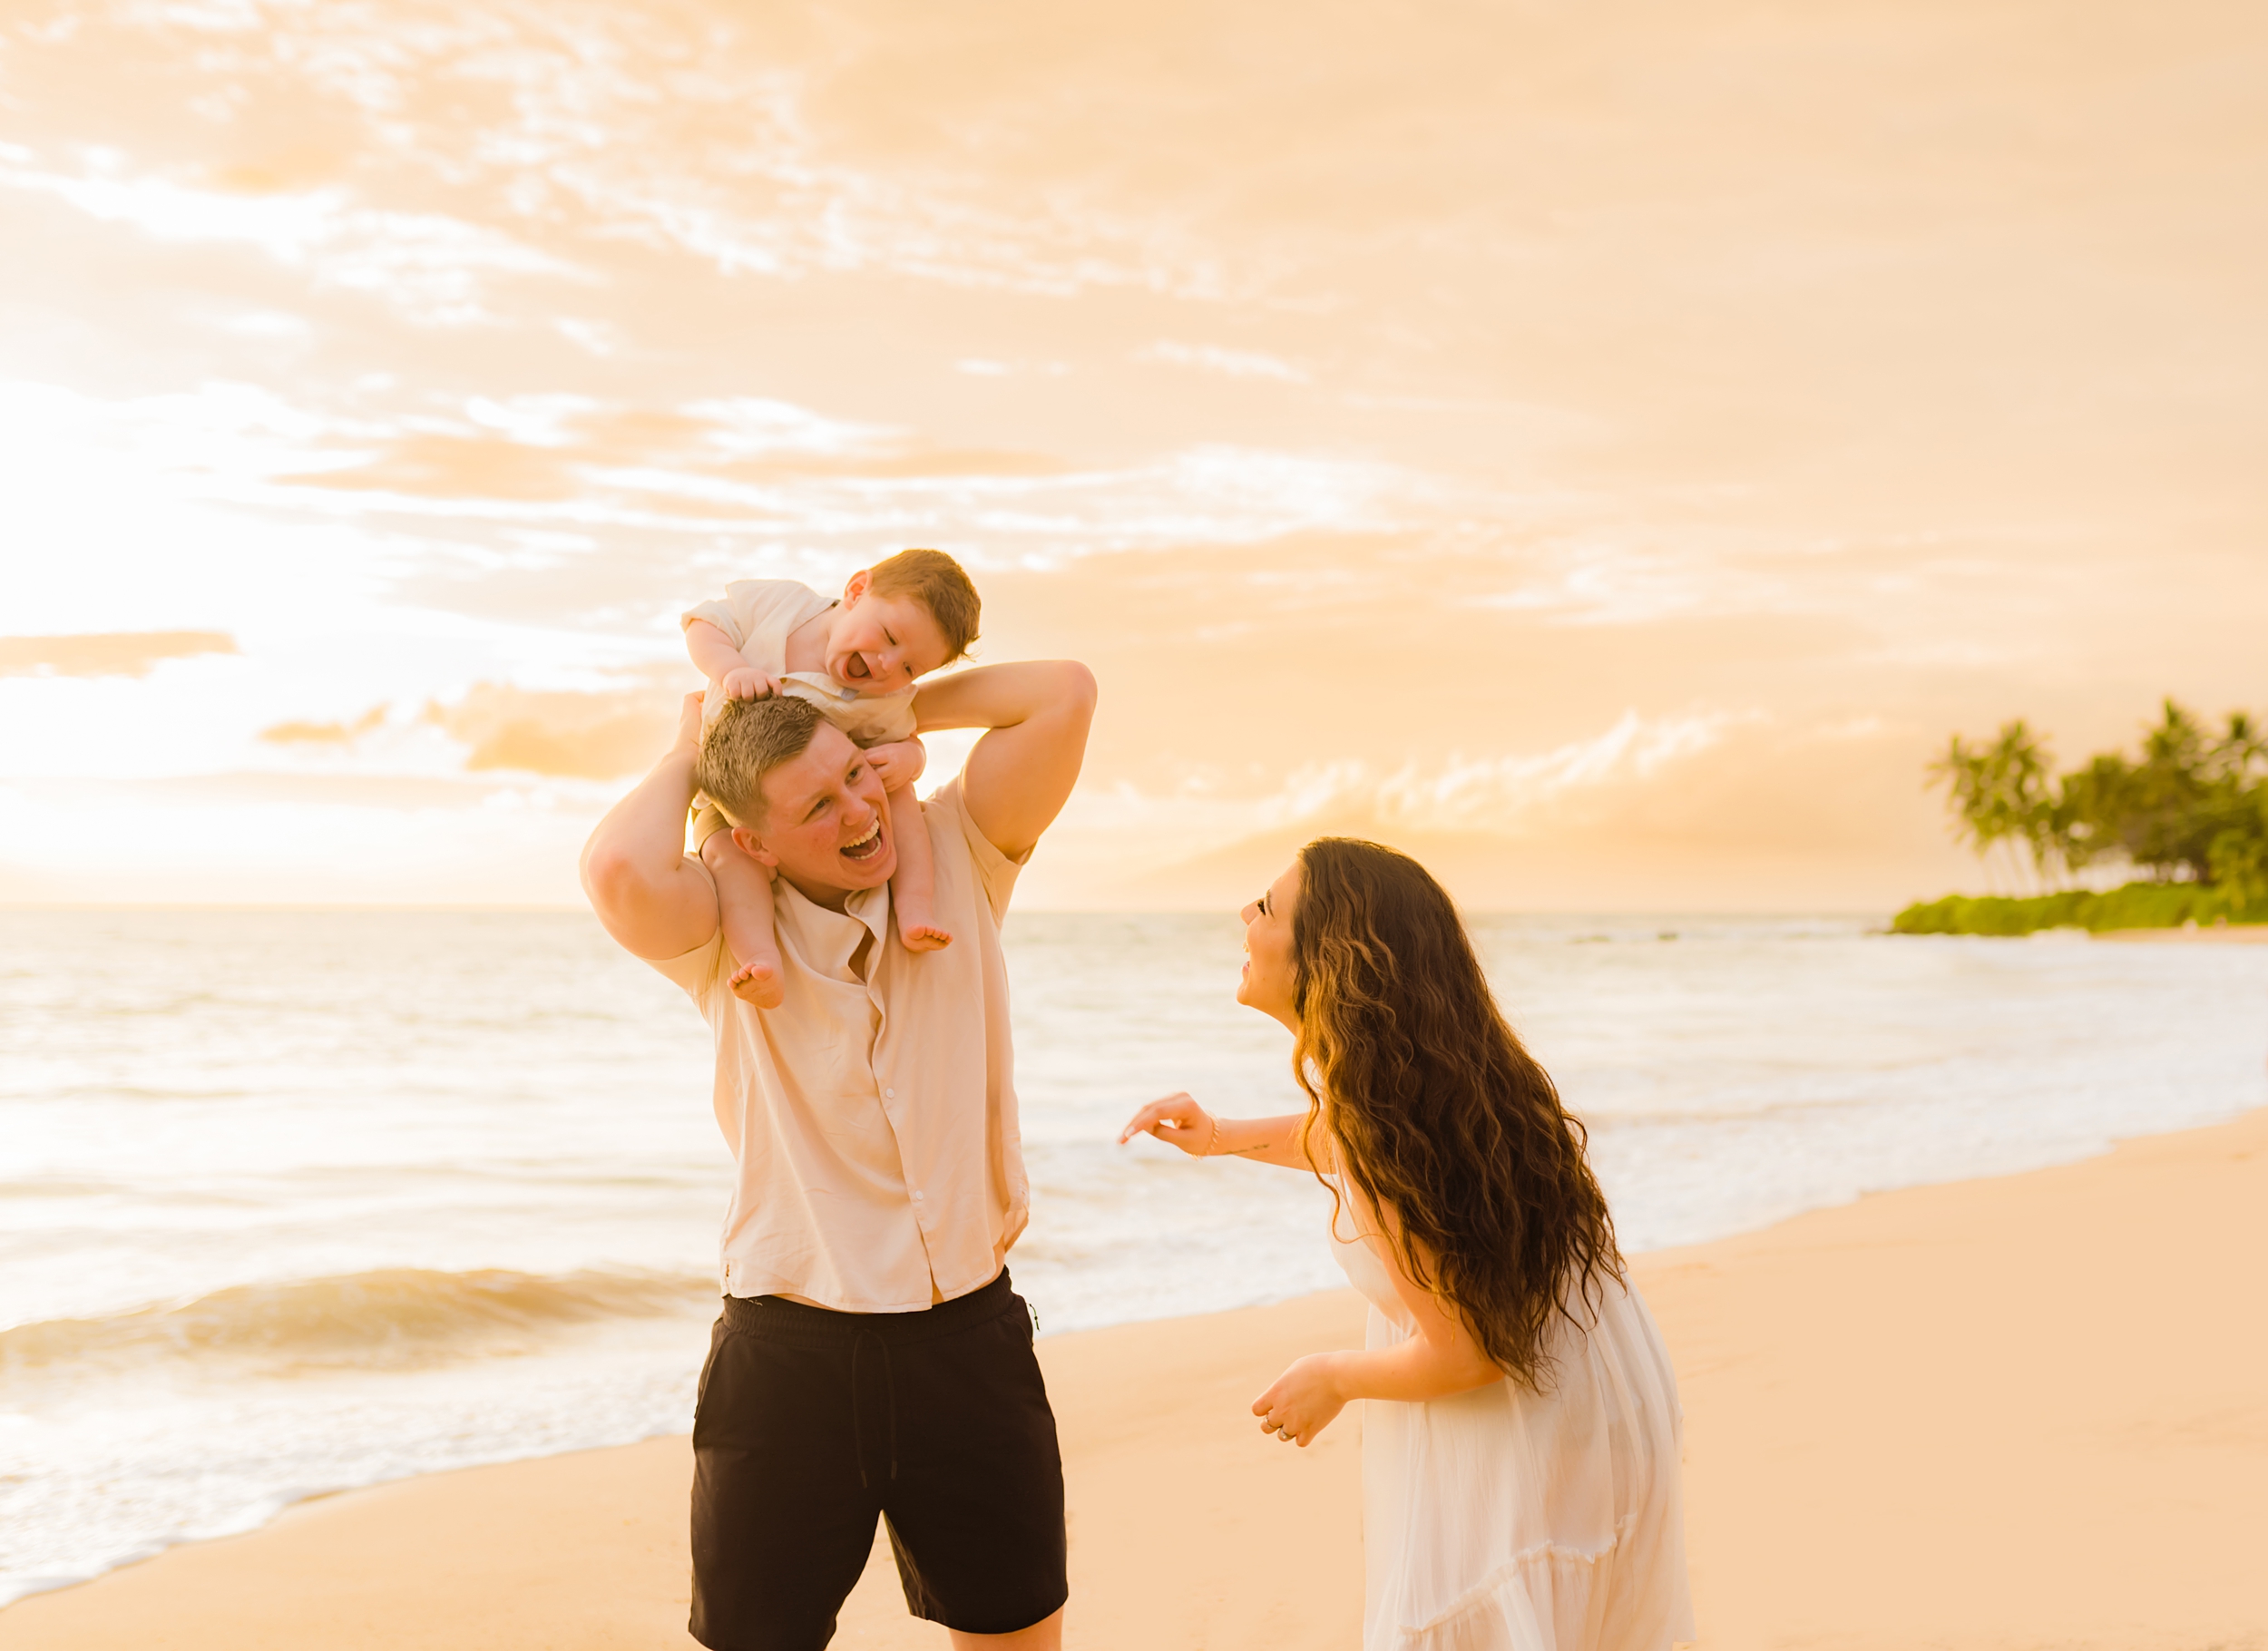 Candid maui family picture featuring young dad and mom making child laugh by lifting him on dad's shoulders during Wailea photoshoot